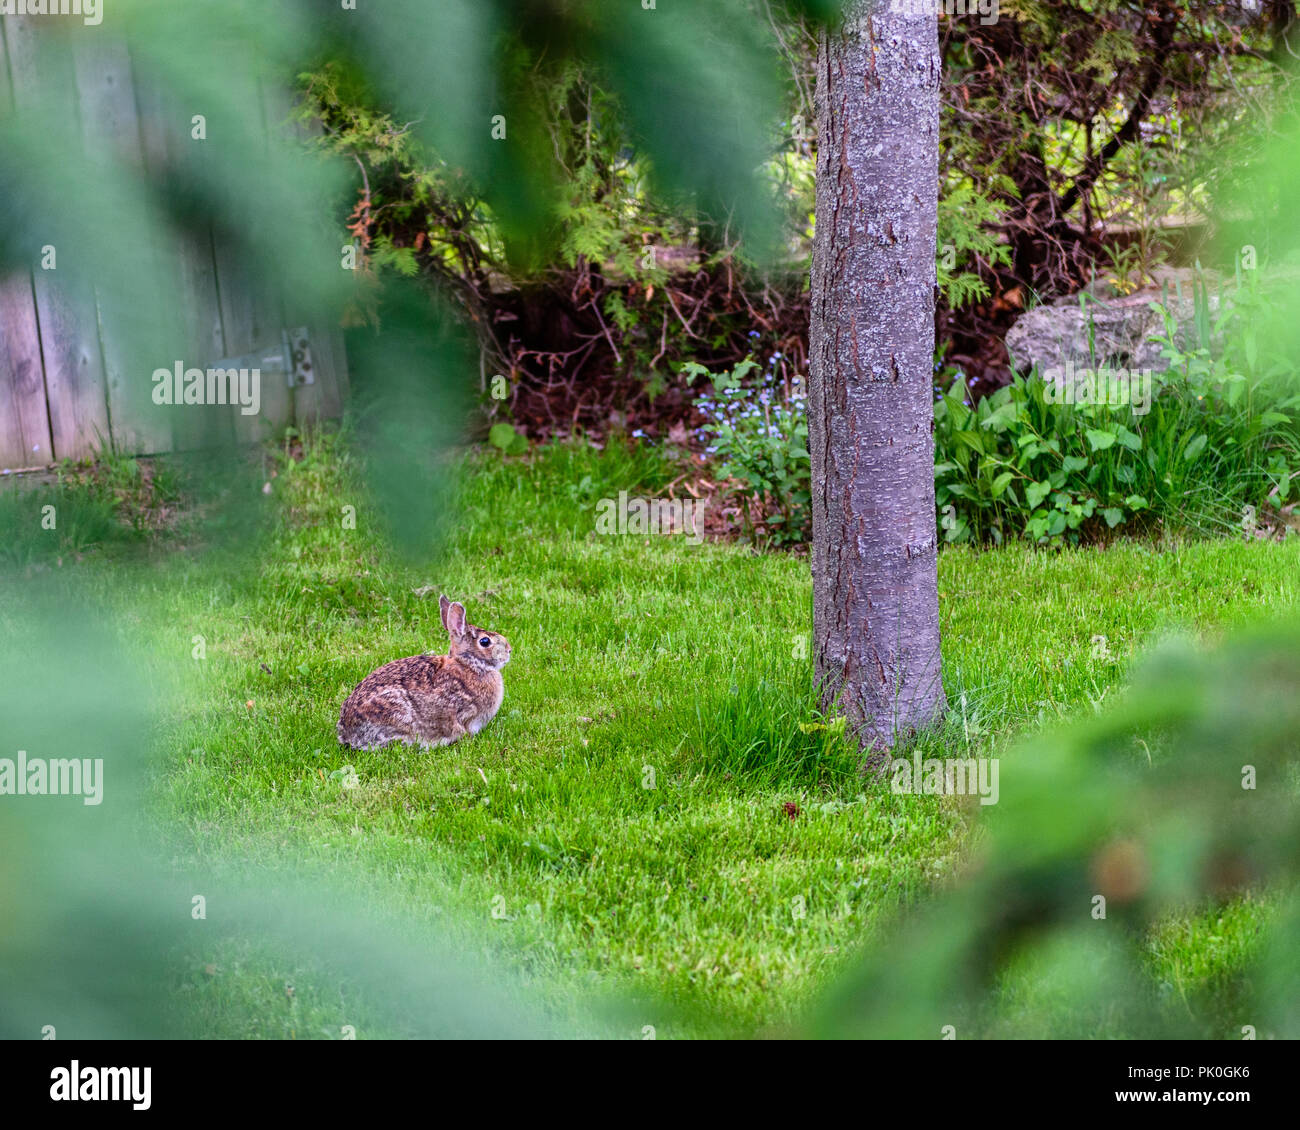 Bunny Rabbit Sitting On The Grass Next To A Tree Seen Through Some Trees Stock Photo